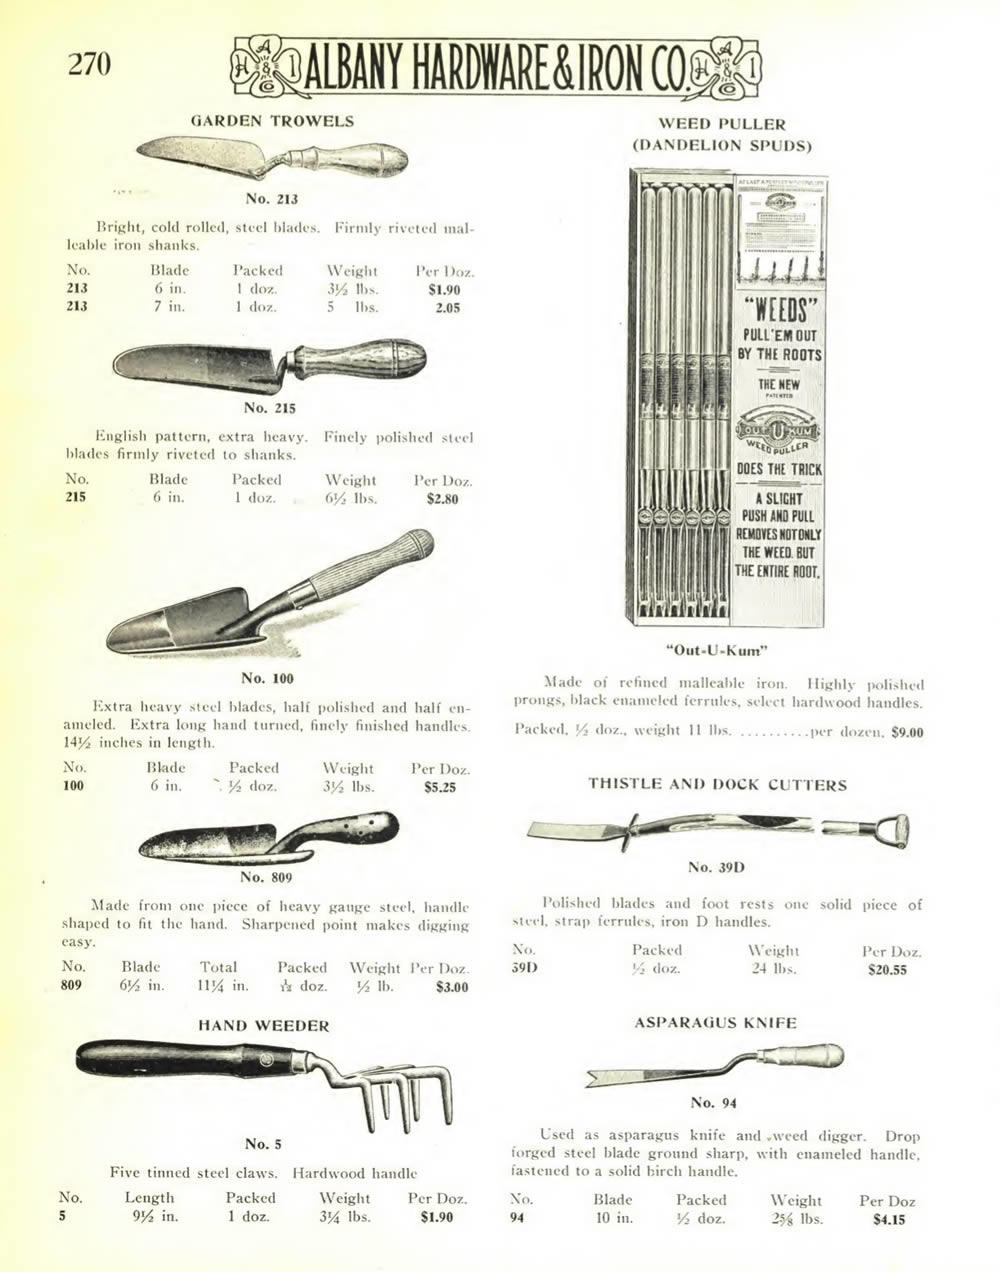 Albany_Hardware_and_Iron_catalog_garden_trowels